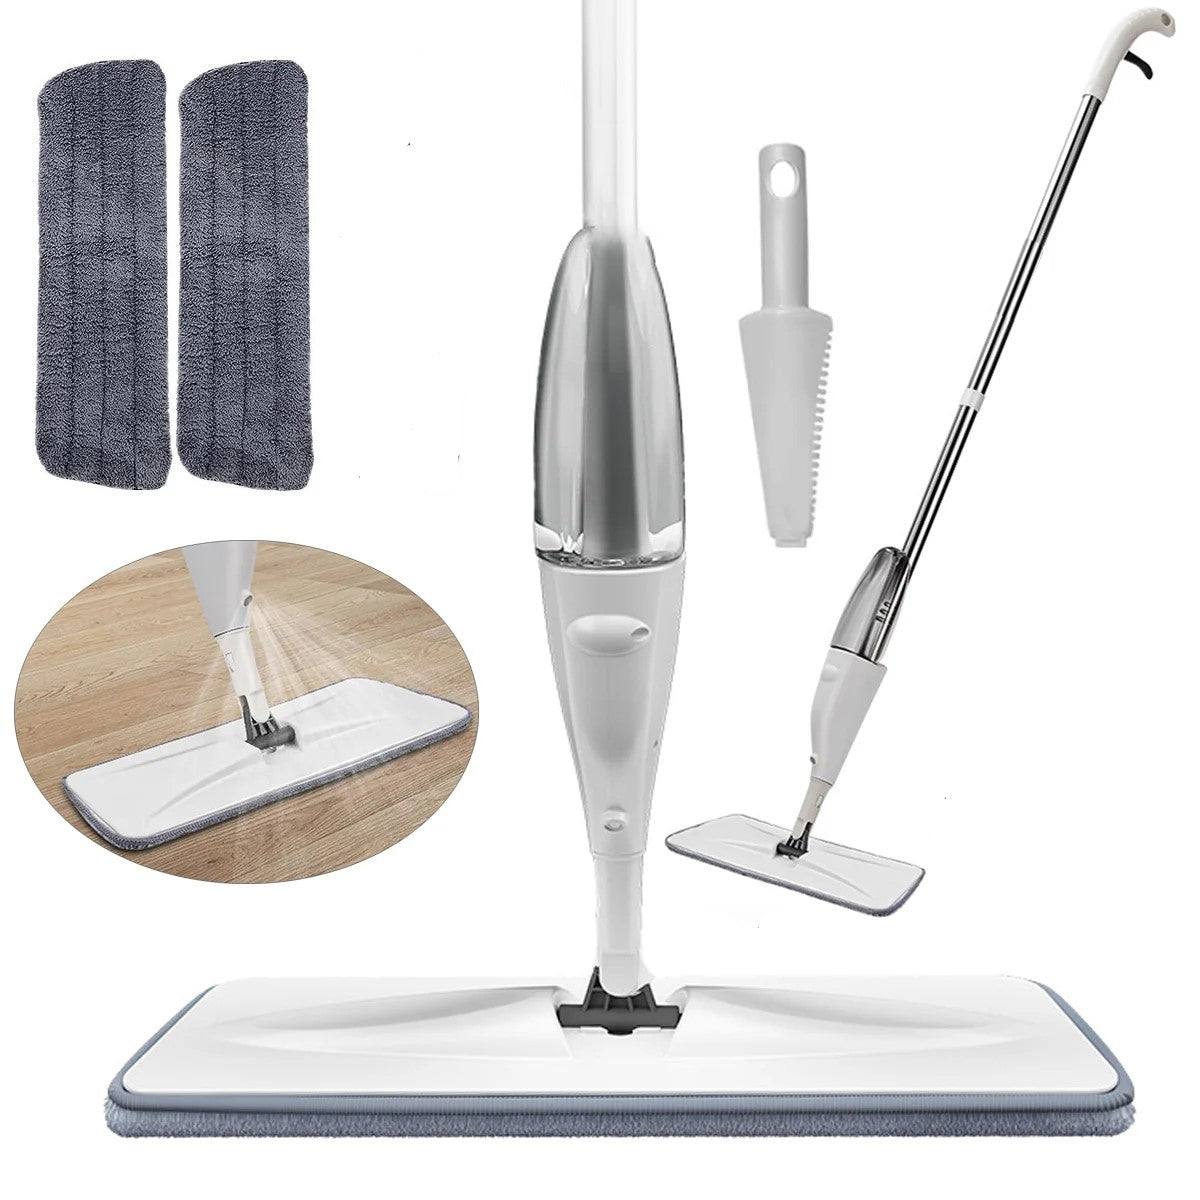 Floor Cleaning Wet Dry Microfiber Spray Mop with 2 Washable Pads Bn-link - BN-LINK